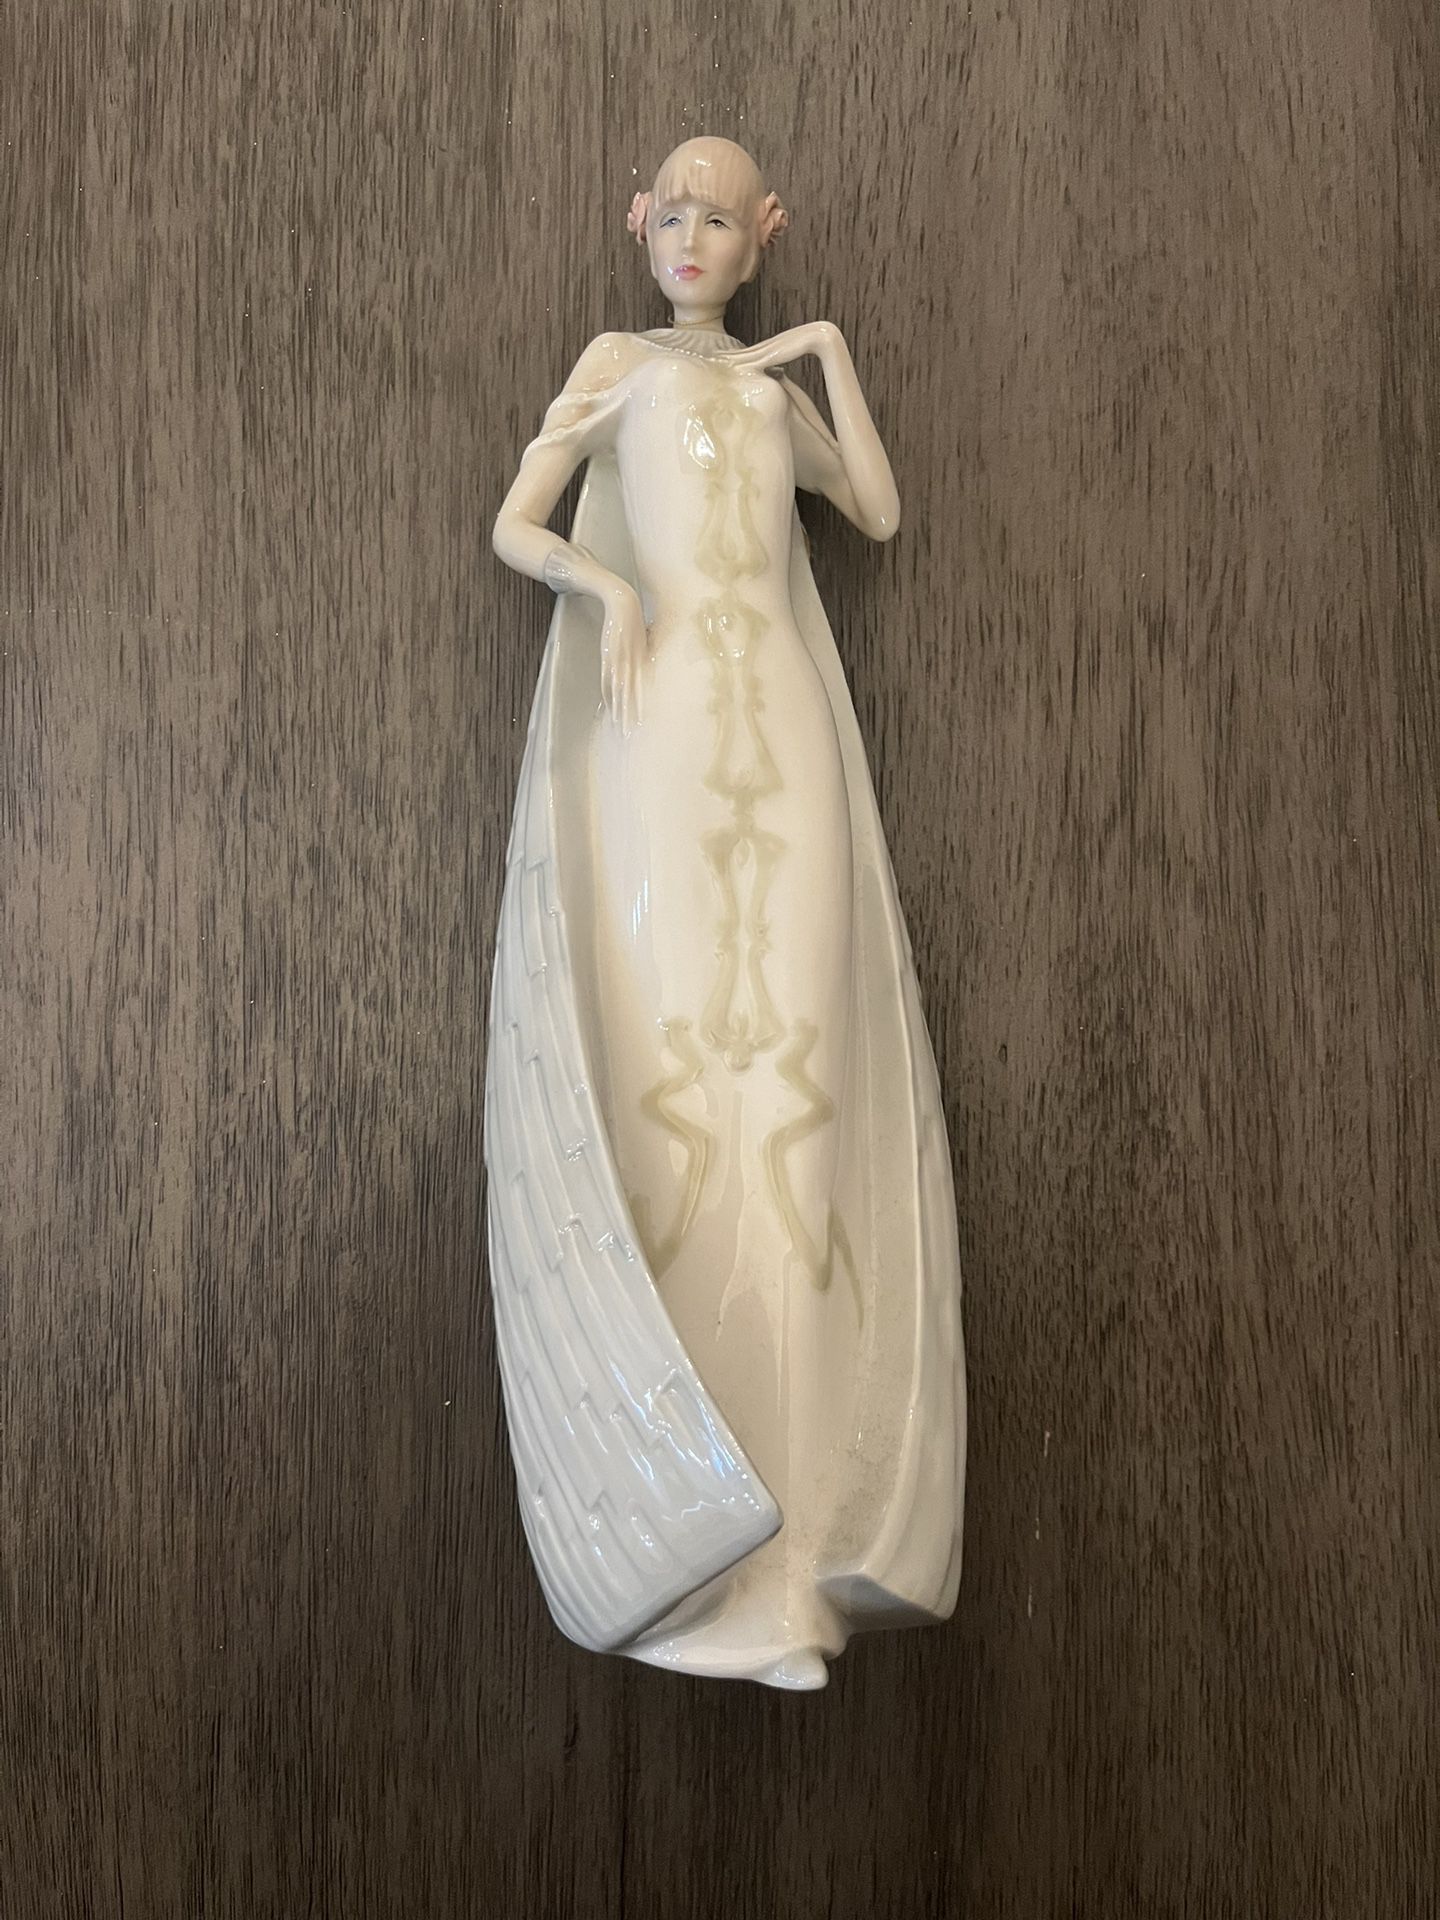 Royal Doulton Reflections Figurine. 